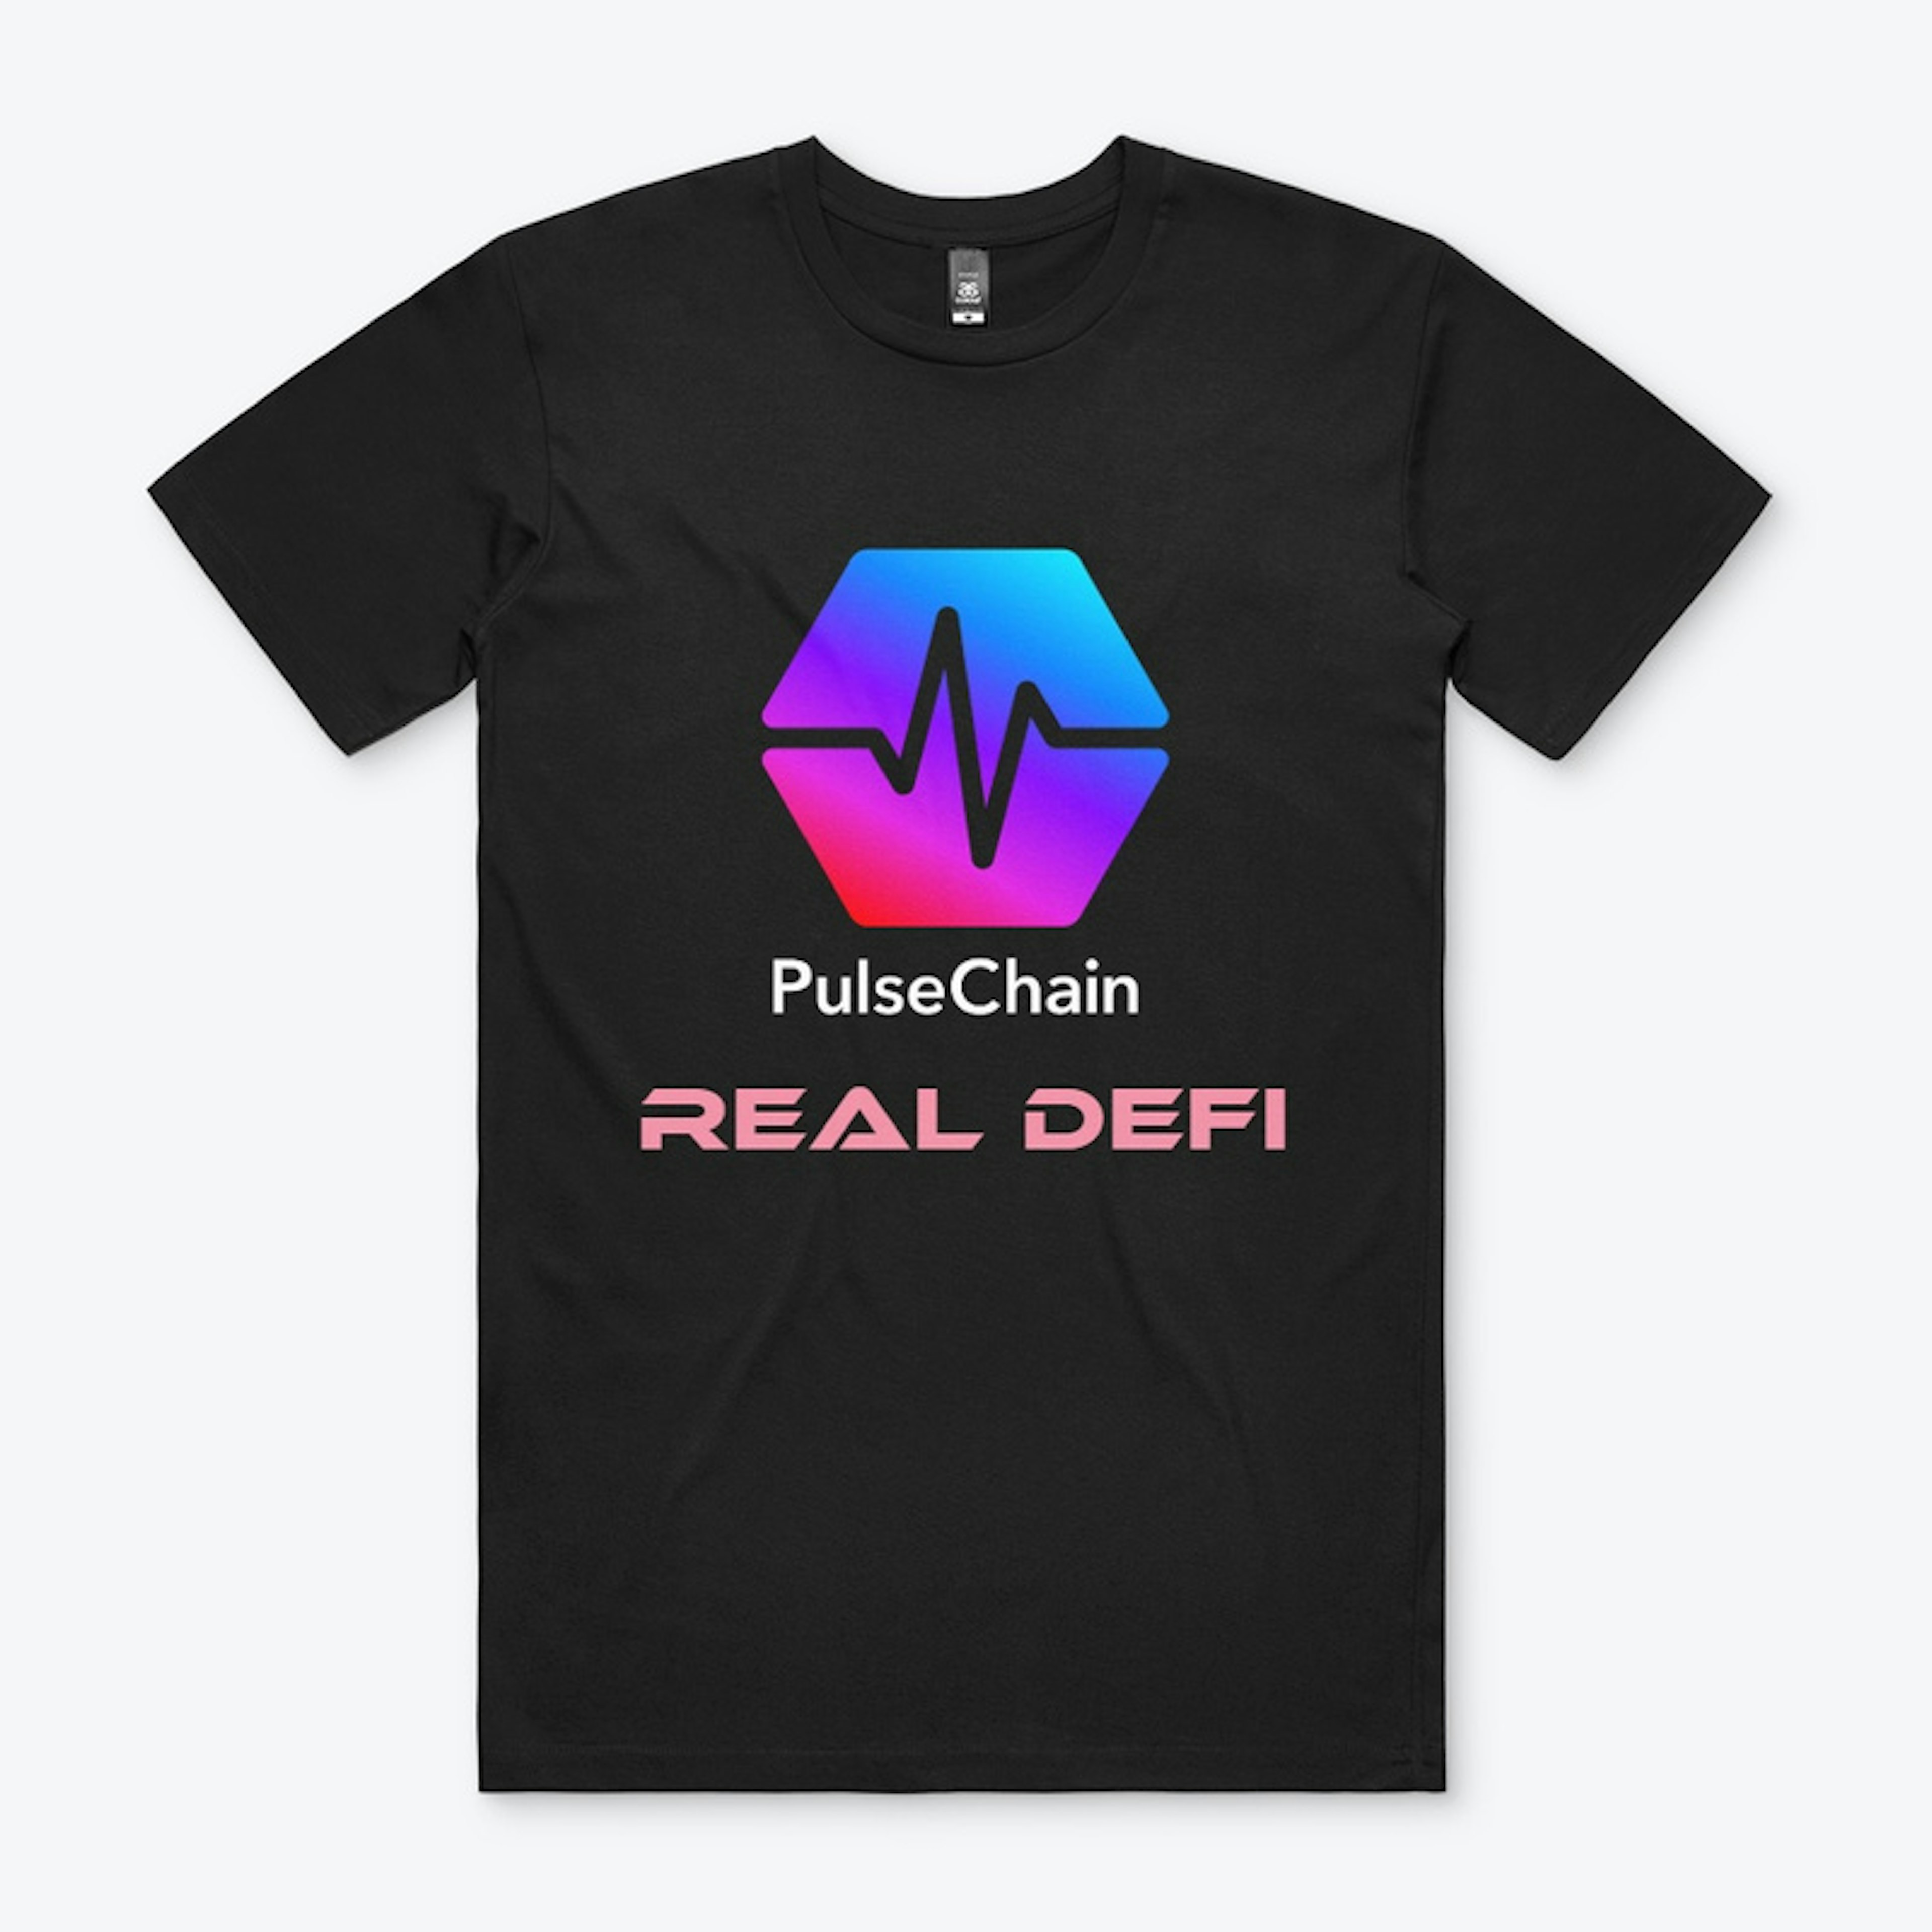 PulseChain "Real DeFi" Collection